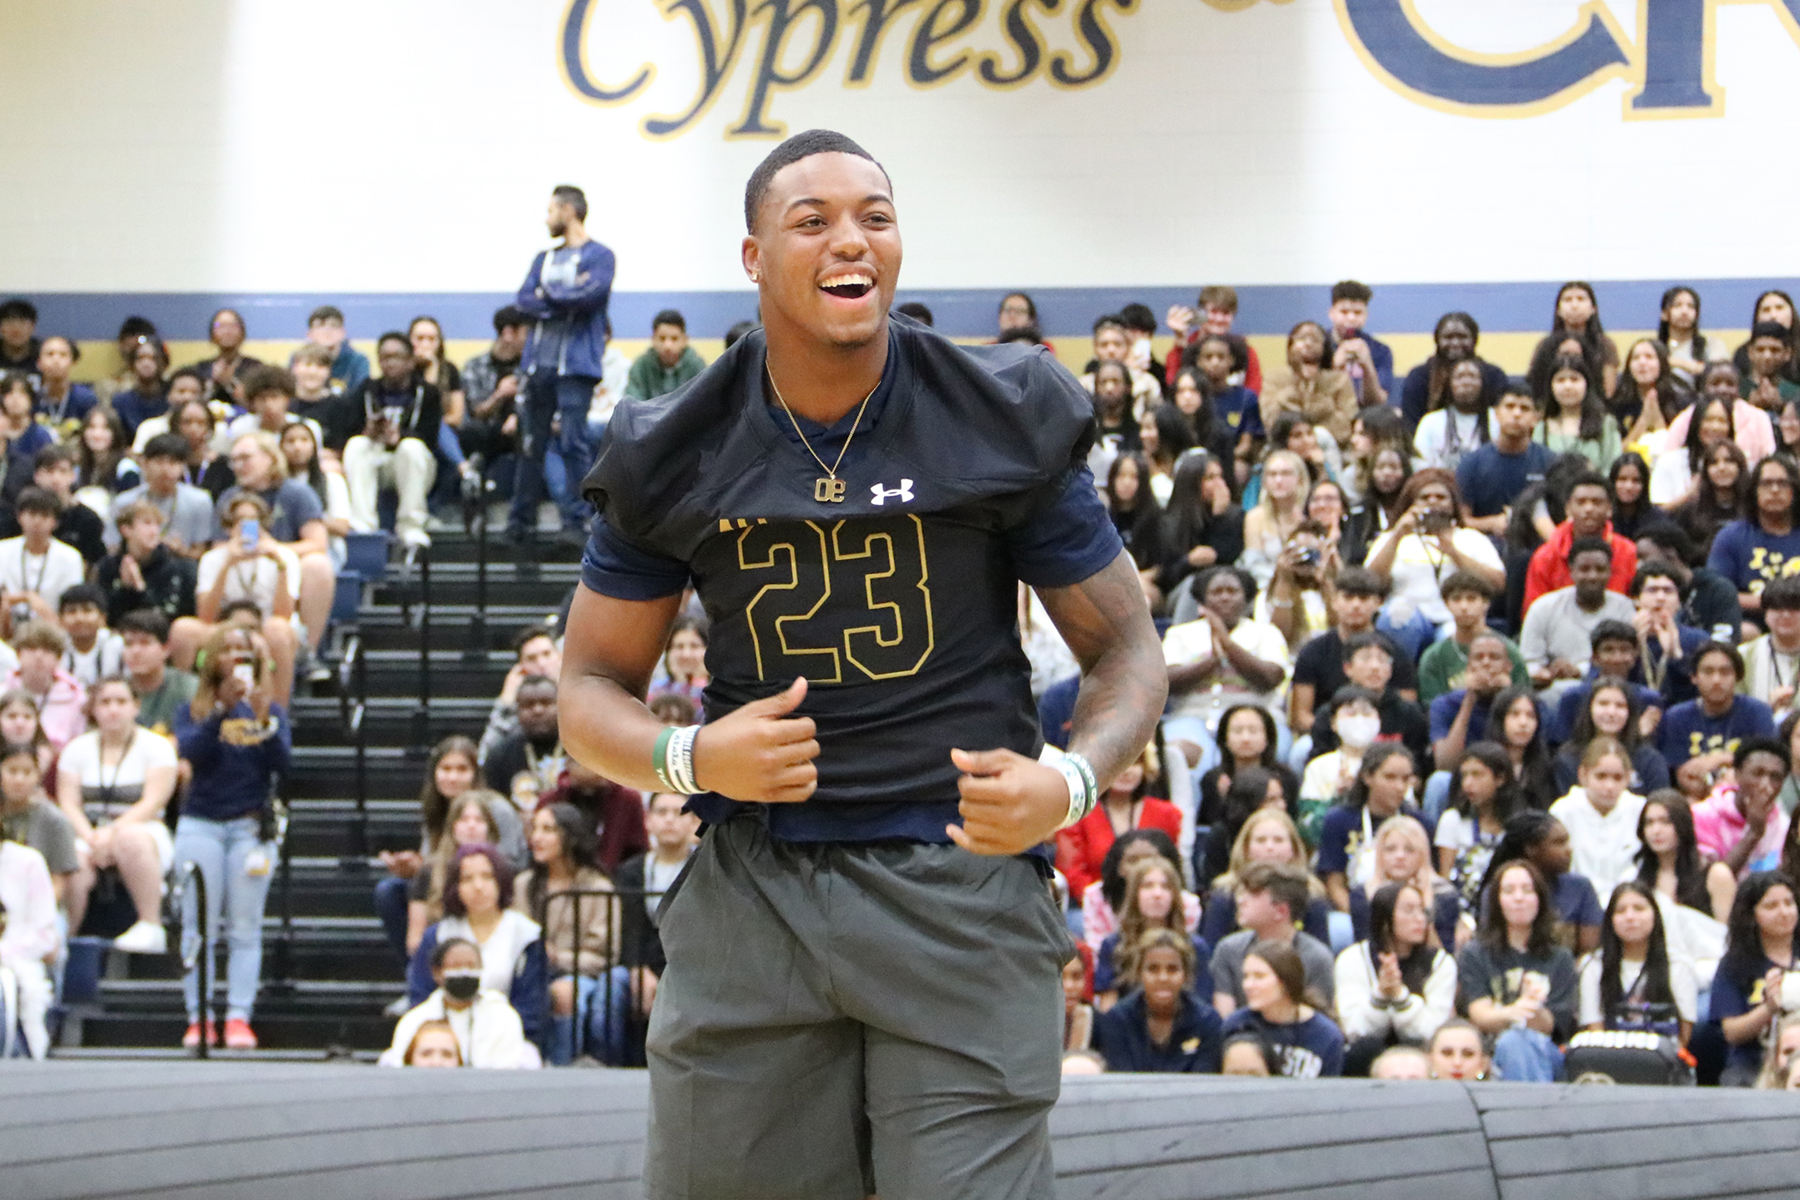 Cypress Ranch HS Football Standout Receives All-American Jersey